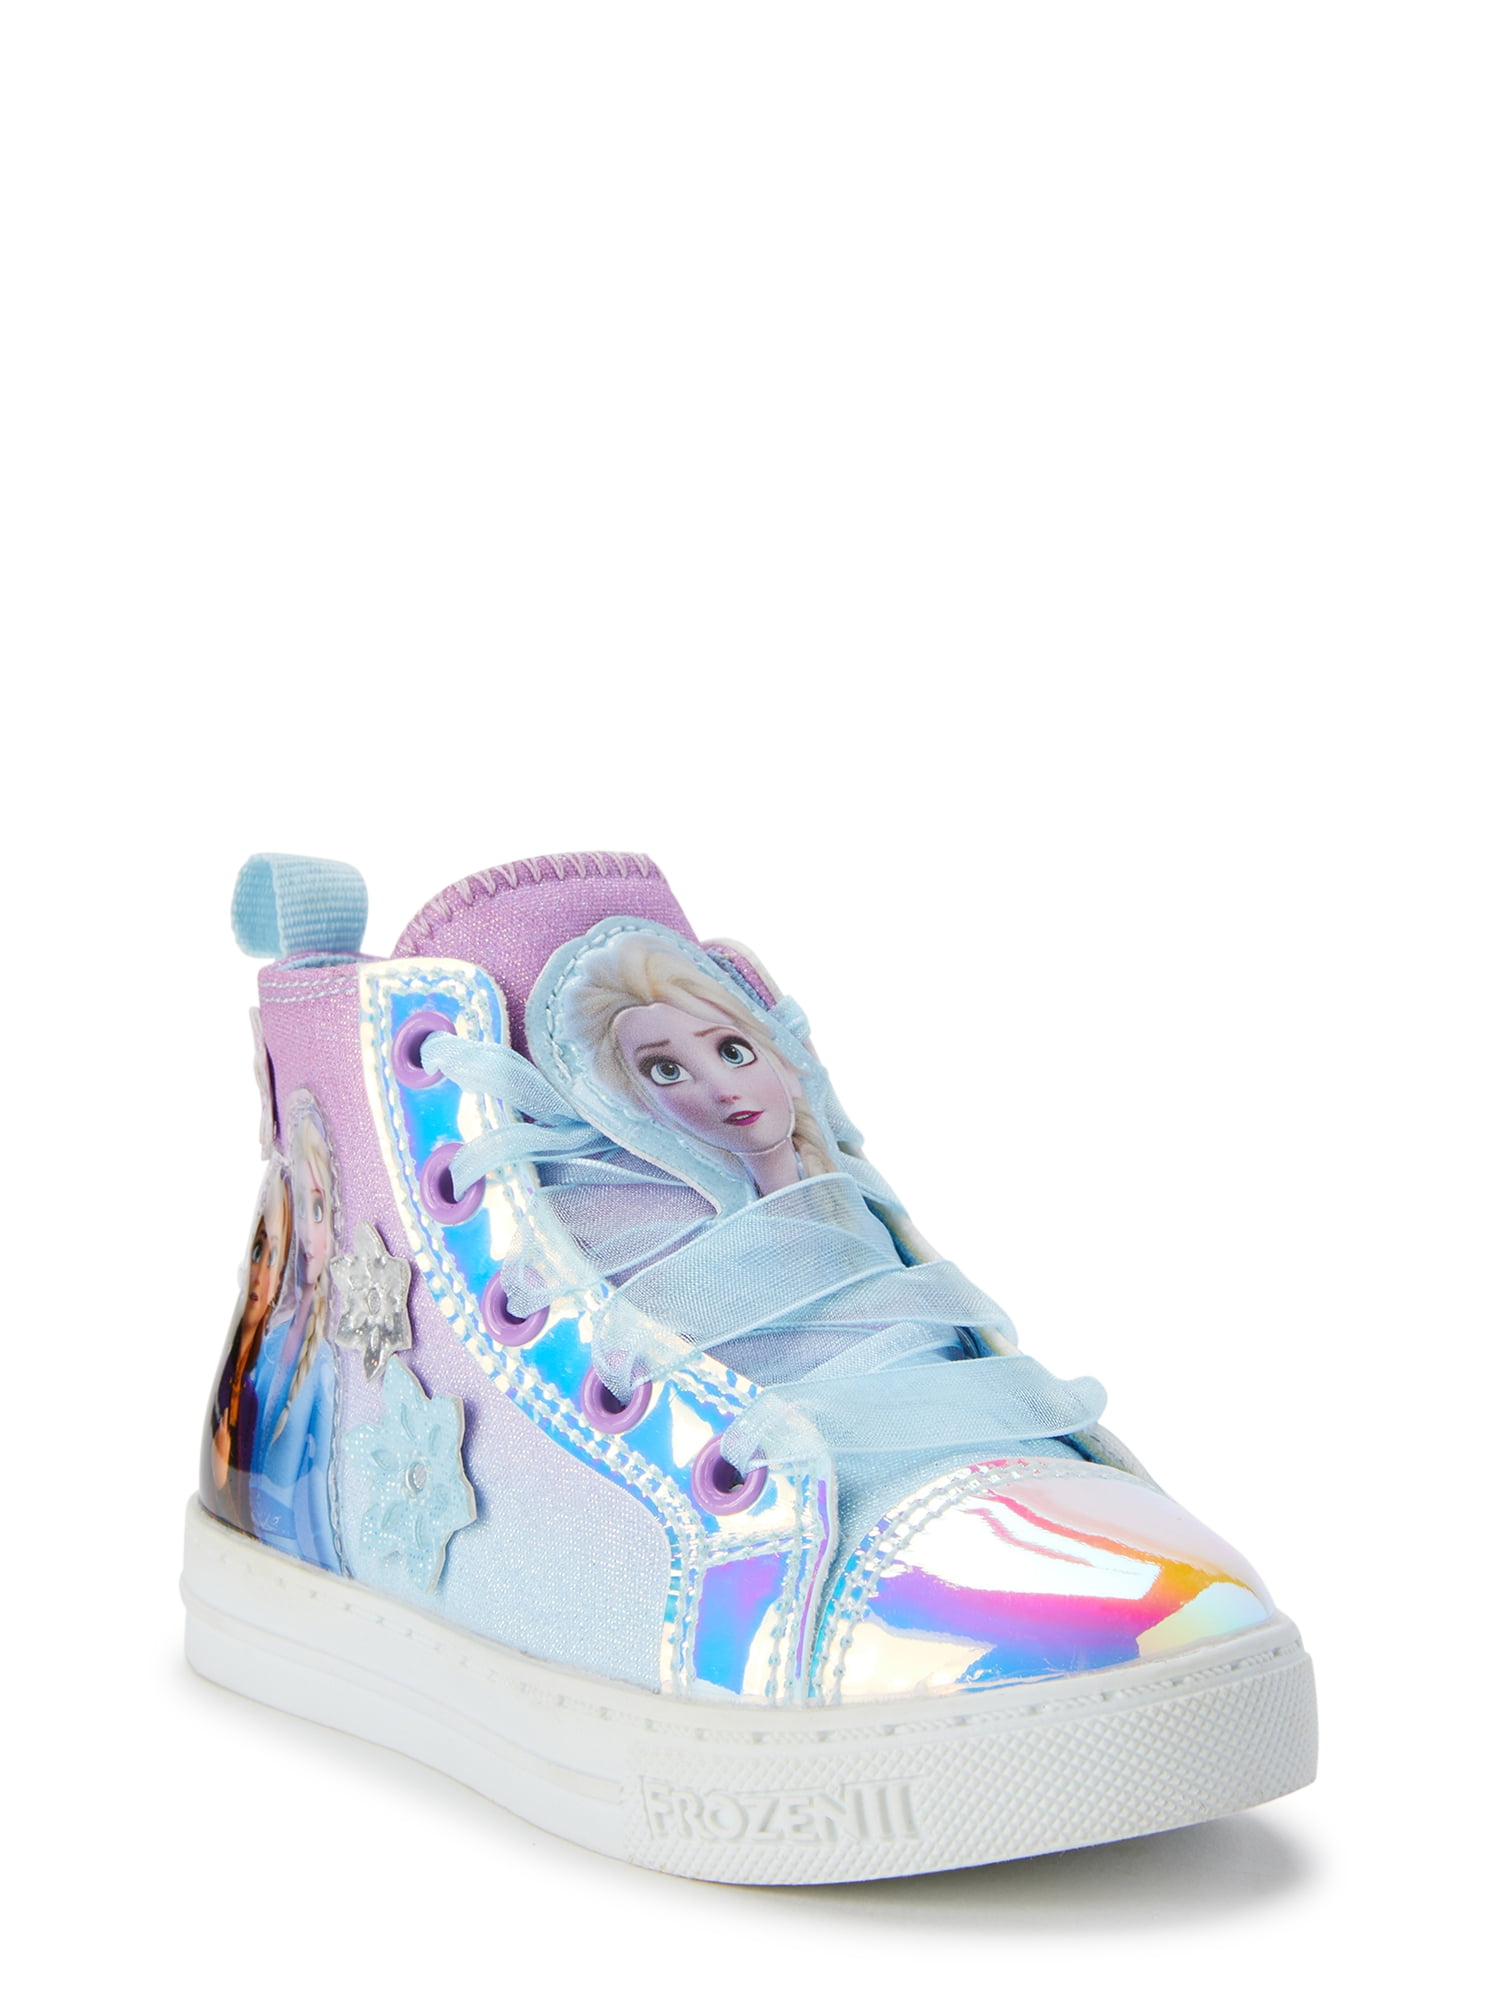 Disney Frozen Elsa Anna High-Top Shoes sneakers Toddler/Youth Blue/Pink